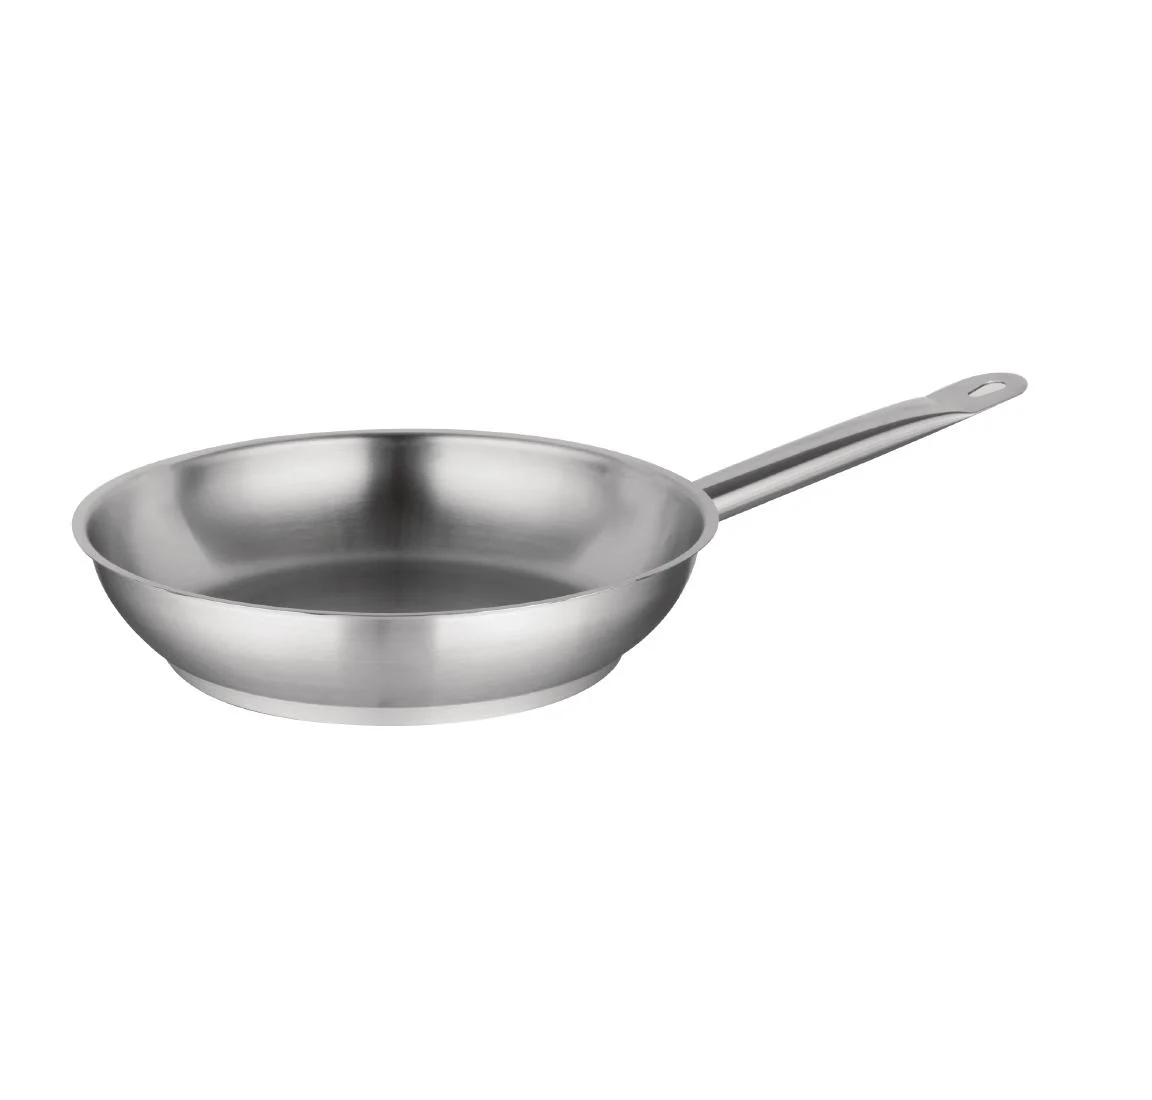 M926 Vogue Stainless Steel Induction Frying Pan 280mm